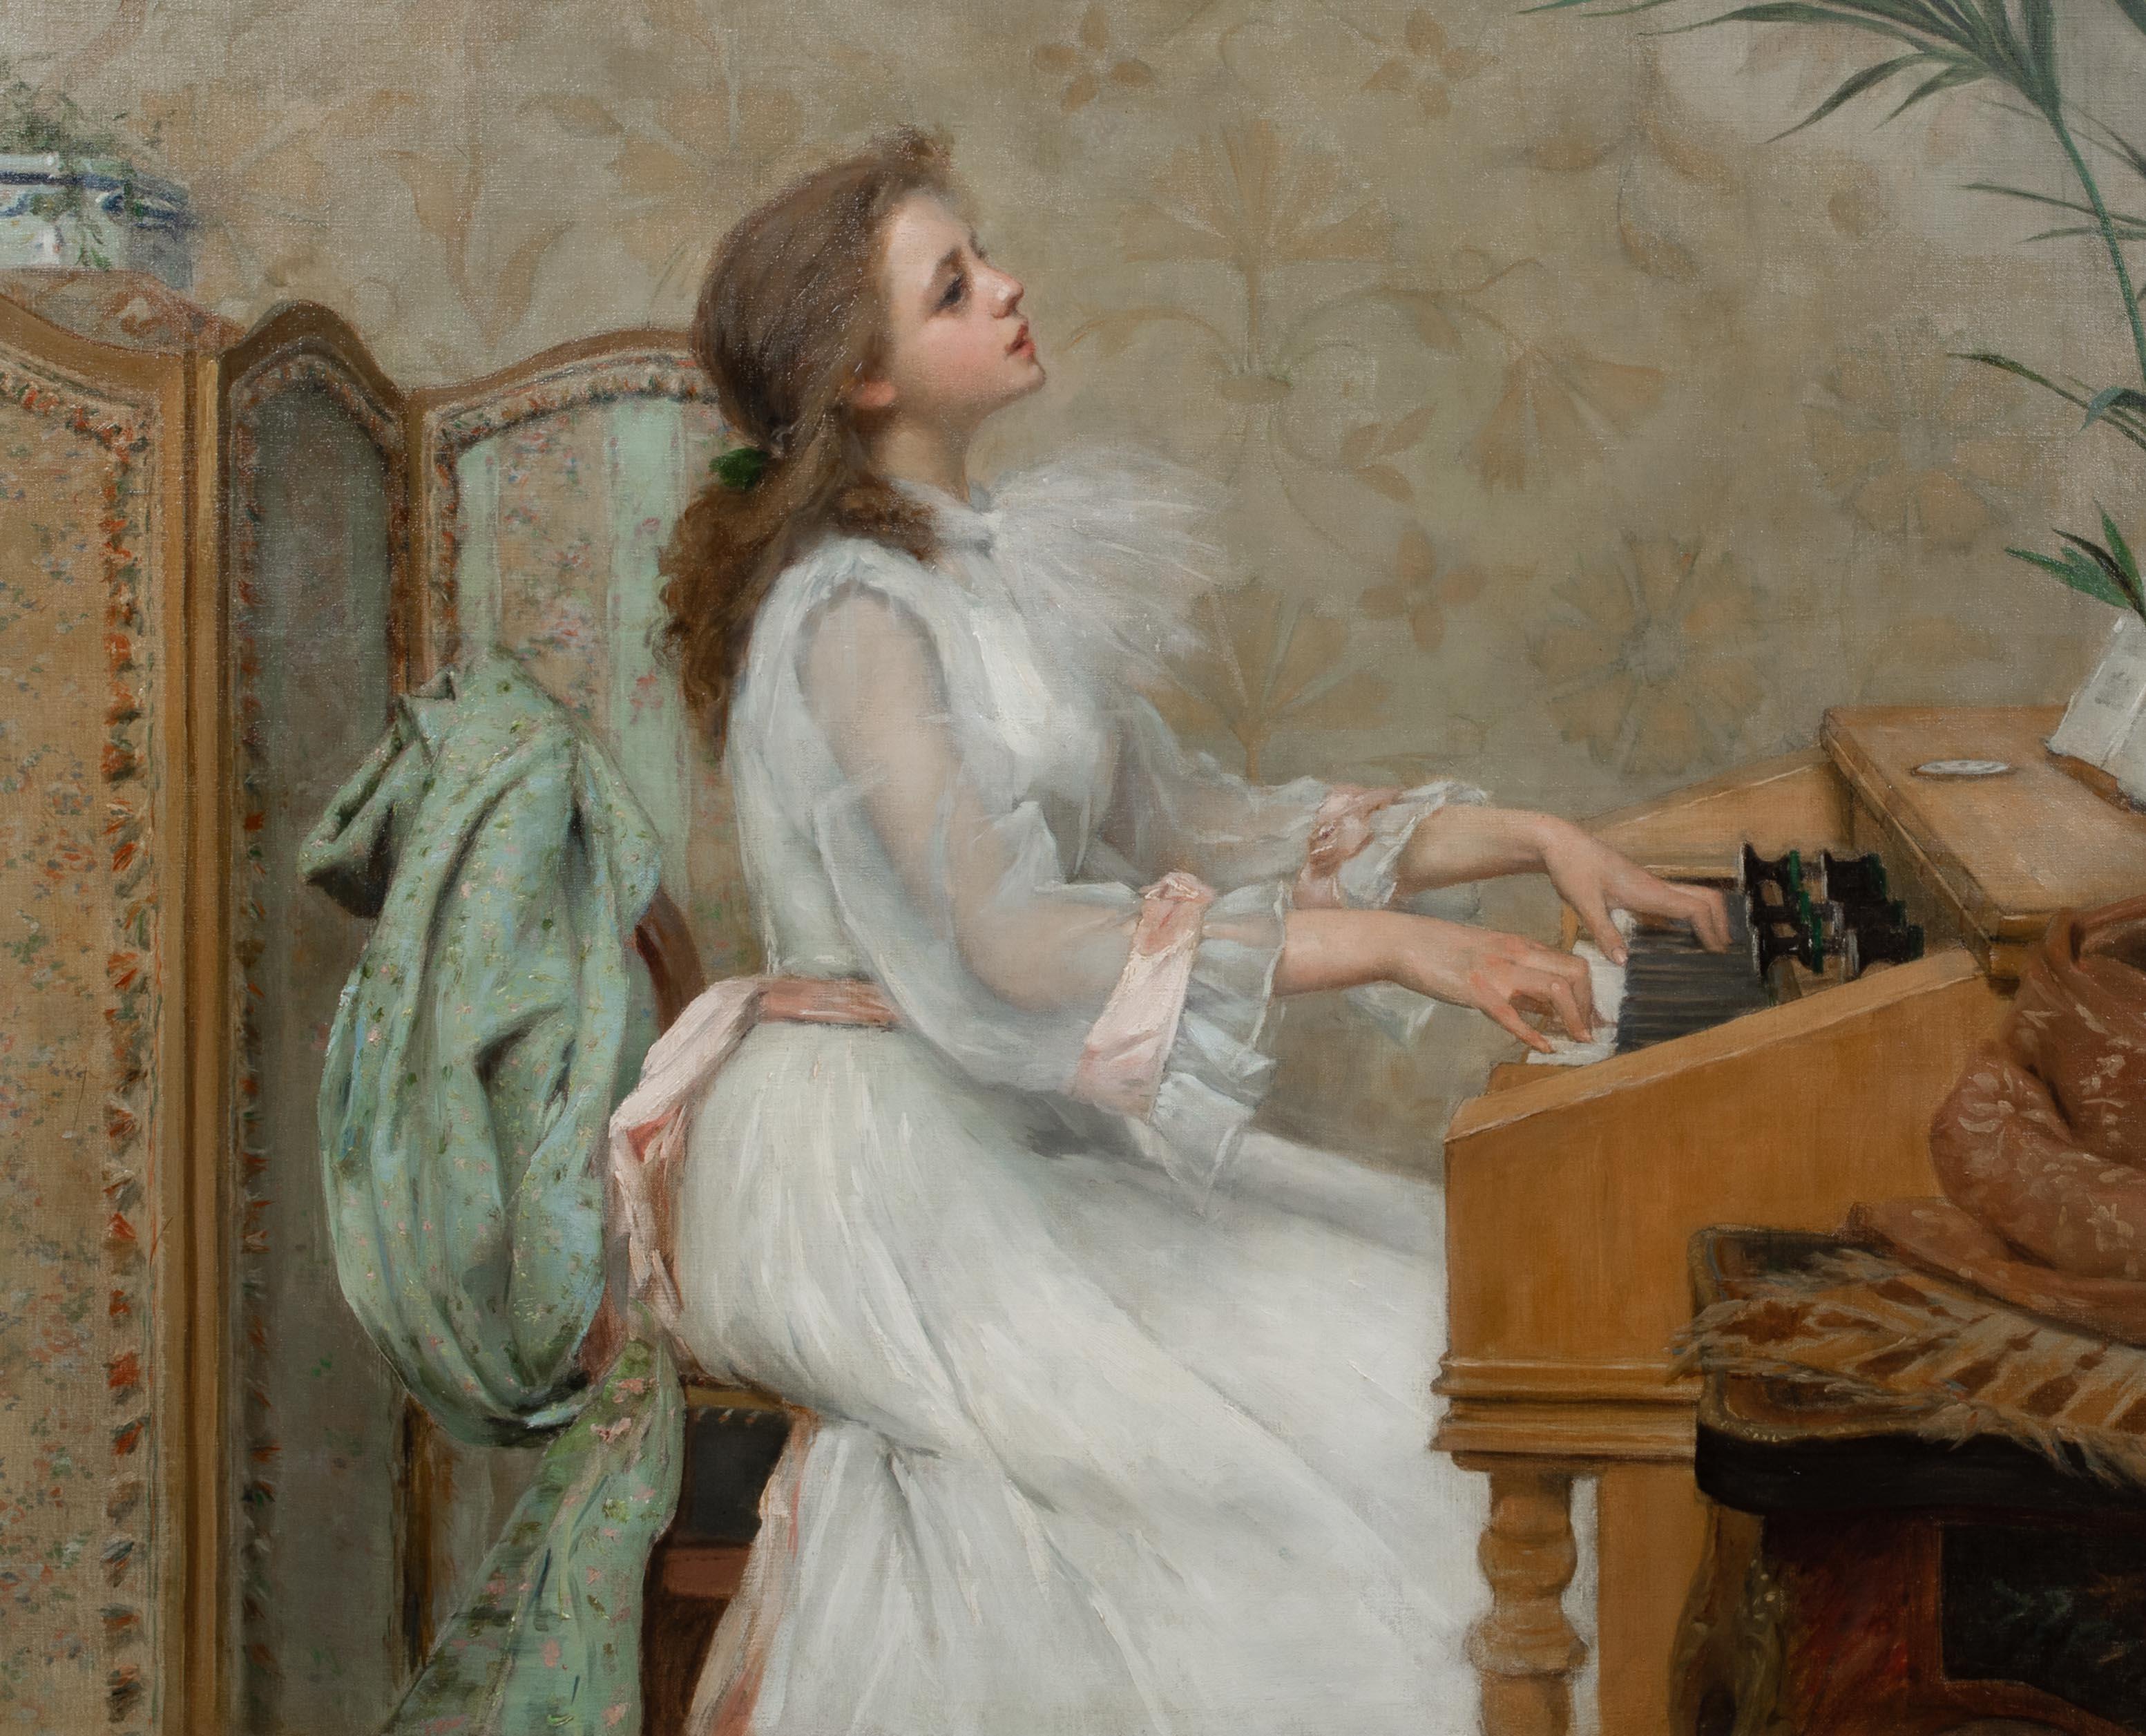 Portrait Of A Girl Playing The Piano, 19th Century

by Berthe BURGKAN (1855-1936)

Large 19th Century French portrait of a young girl in a white dress playing the piano, oil on canvas by Berthe Burgkan. Excellent quality and condition study of the